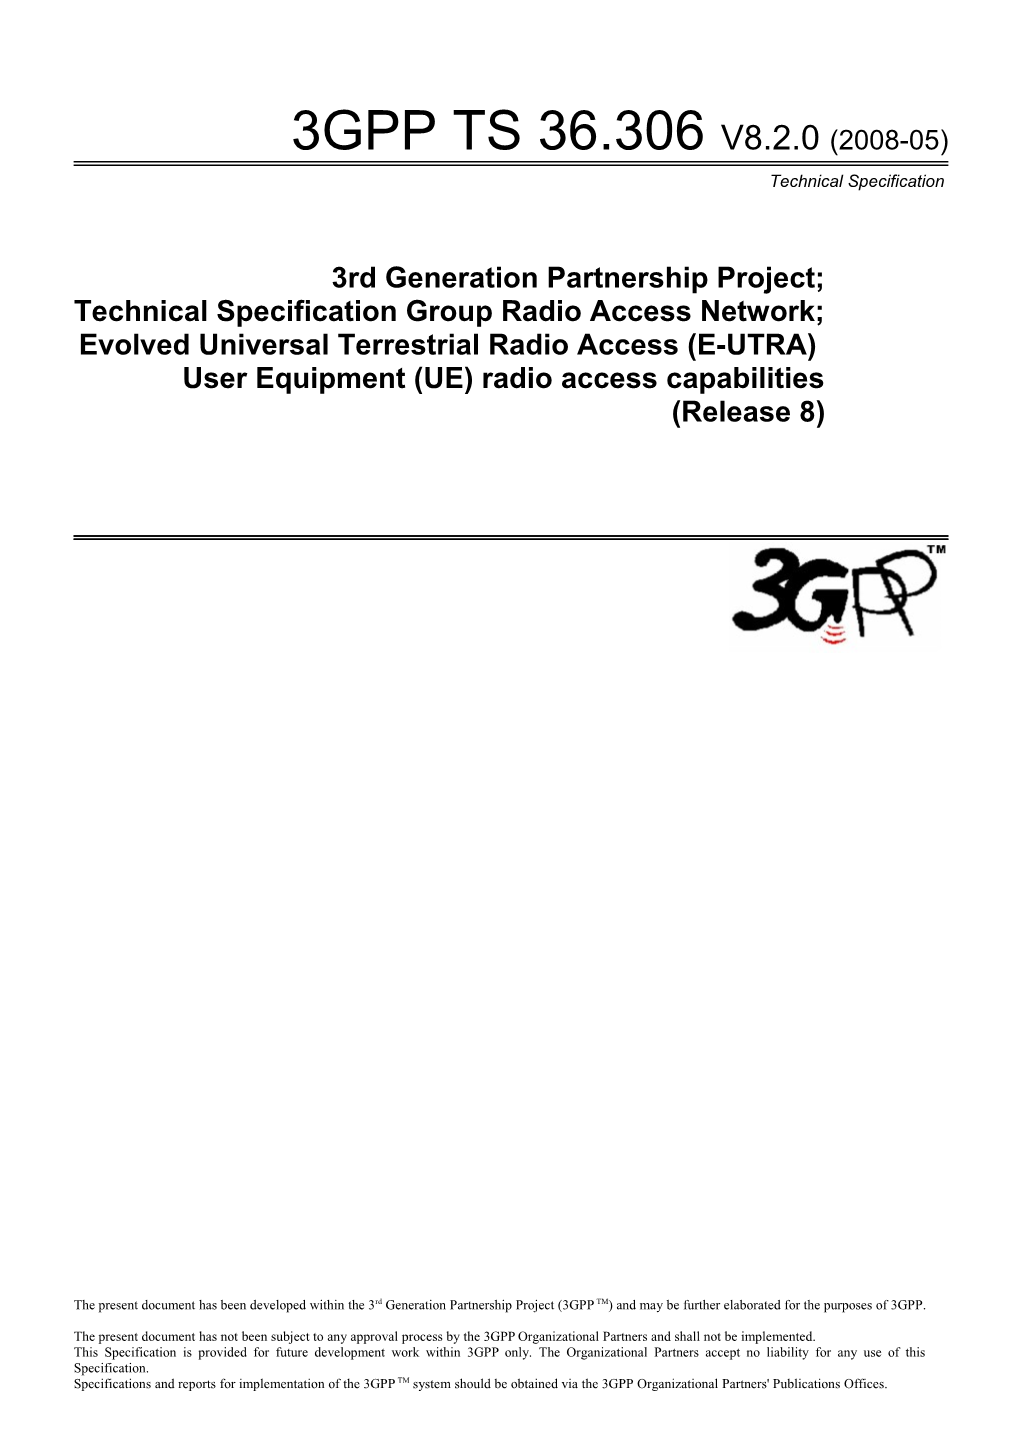 Technical Specification Group Radio Access Network; s3